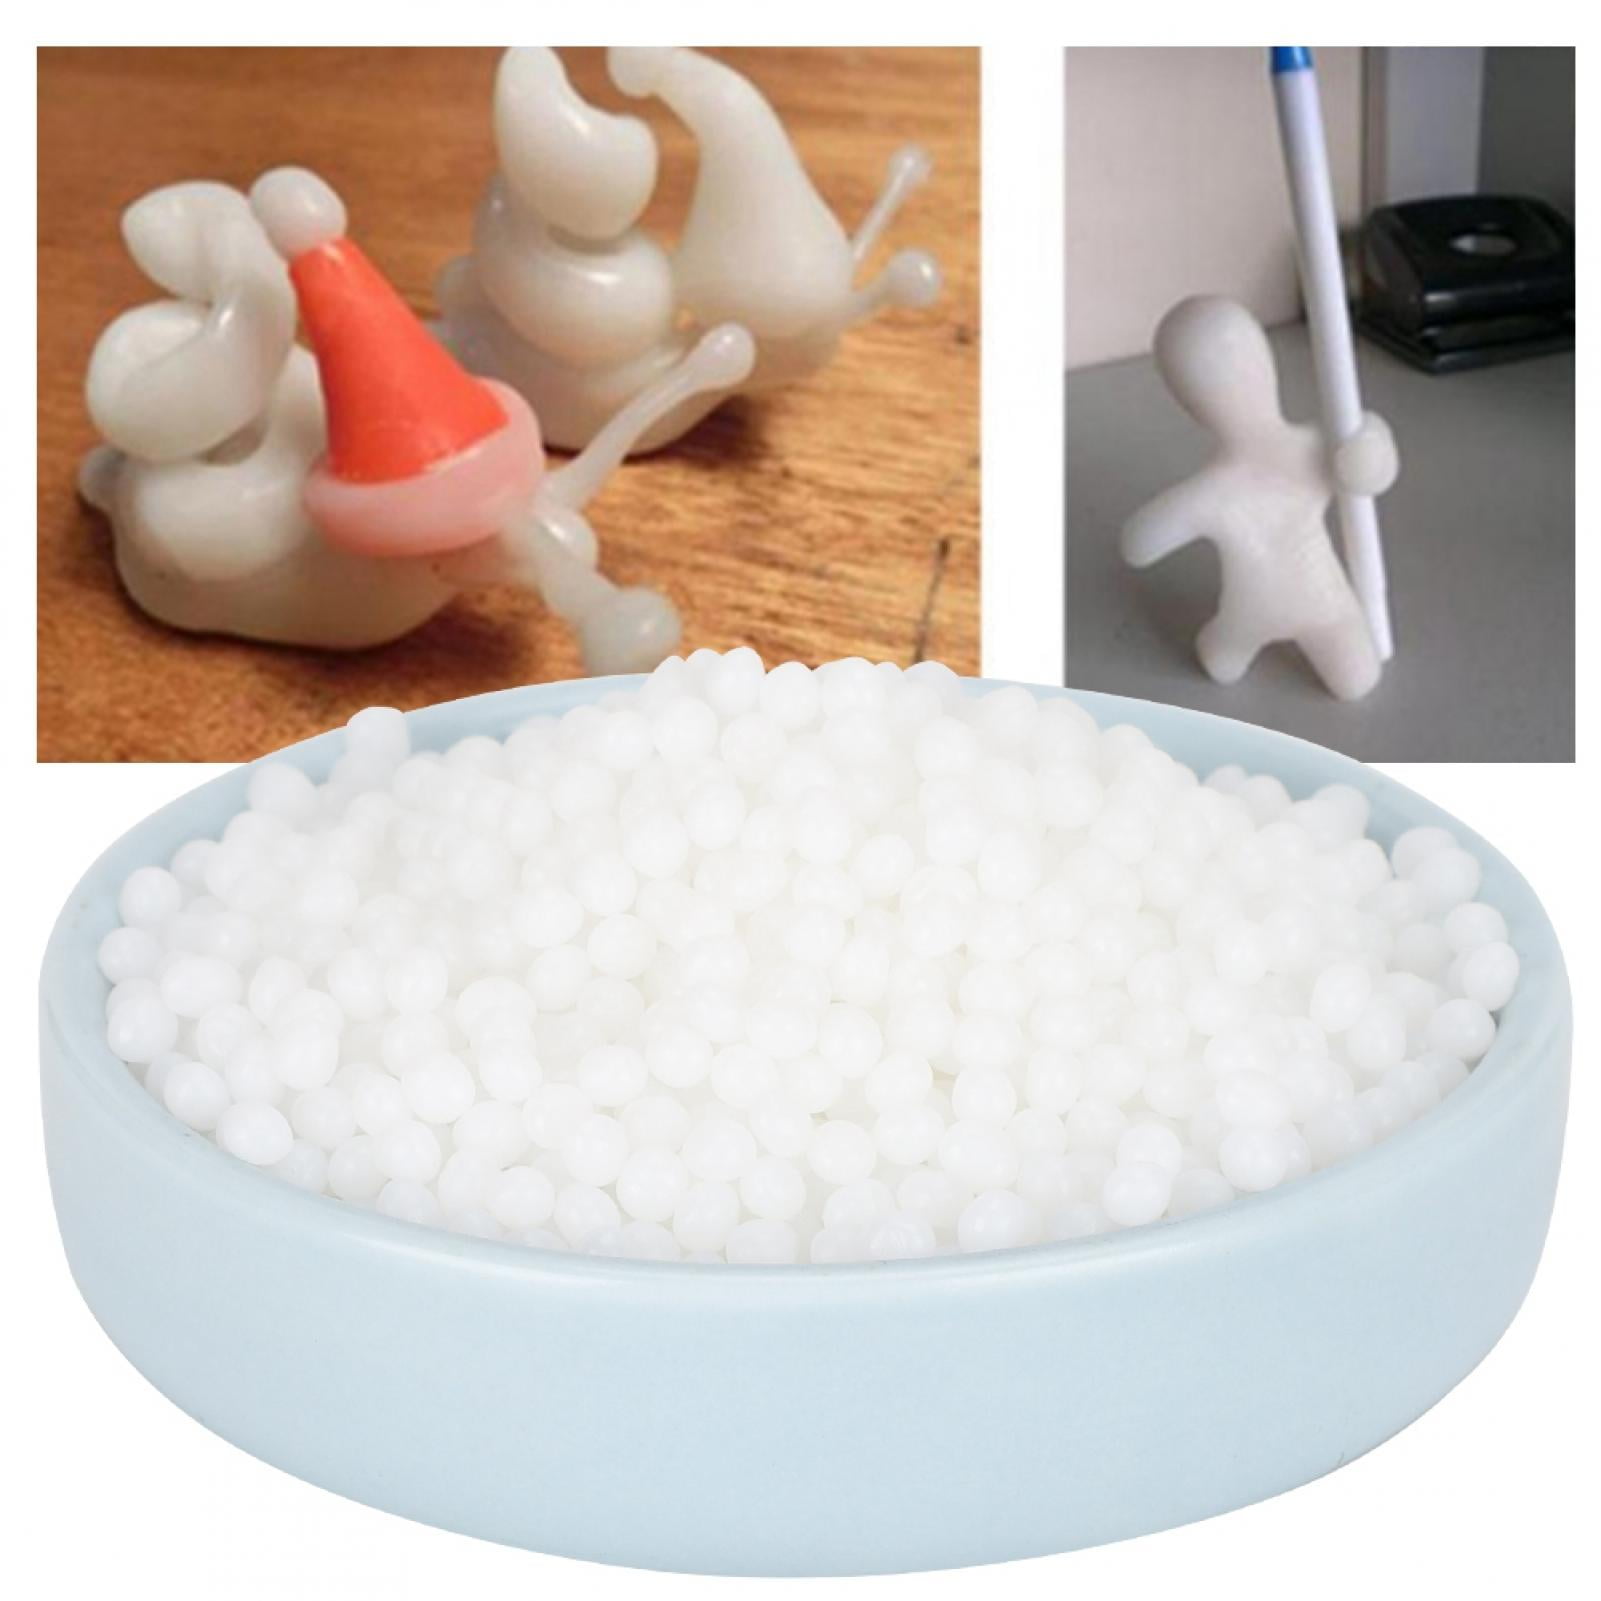 Moldable Plastic Pellets Replacement Thermal Adhesive Fitting Beads for  Fake Teeth Reheatable Reusable Moldable Crafting Plastic Moldable Sculpting  Plastic Heat Pliable Cool Hard 